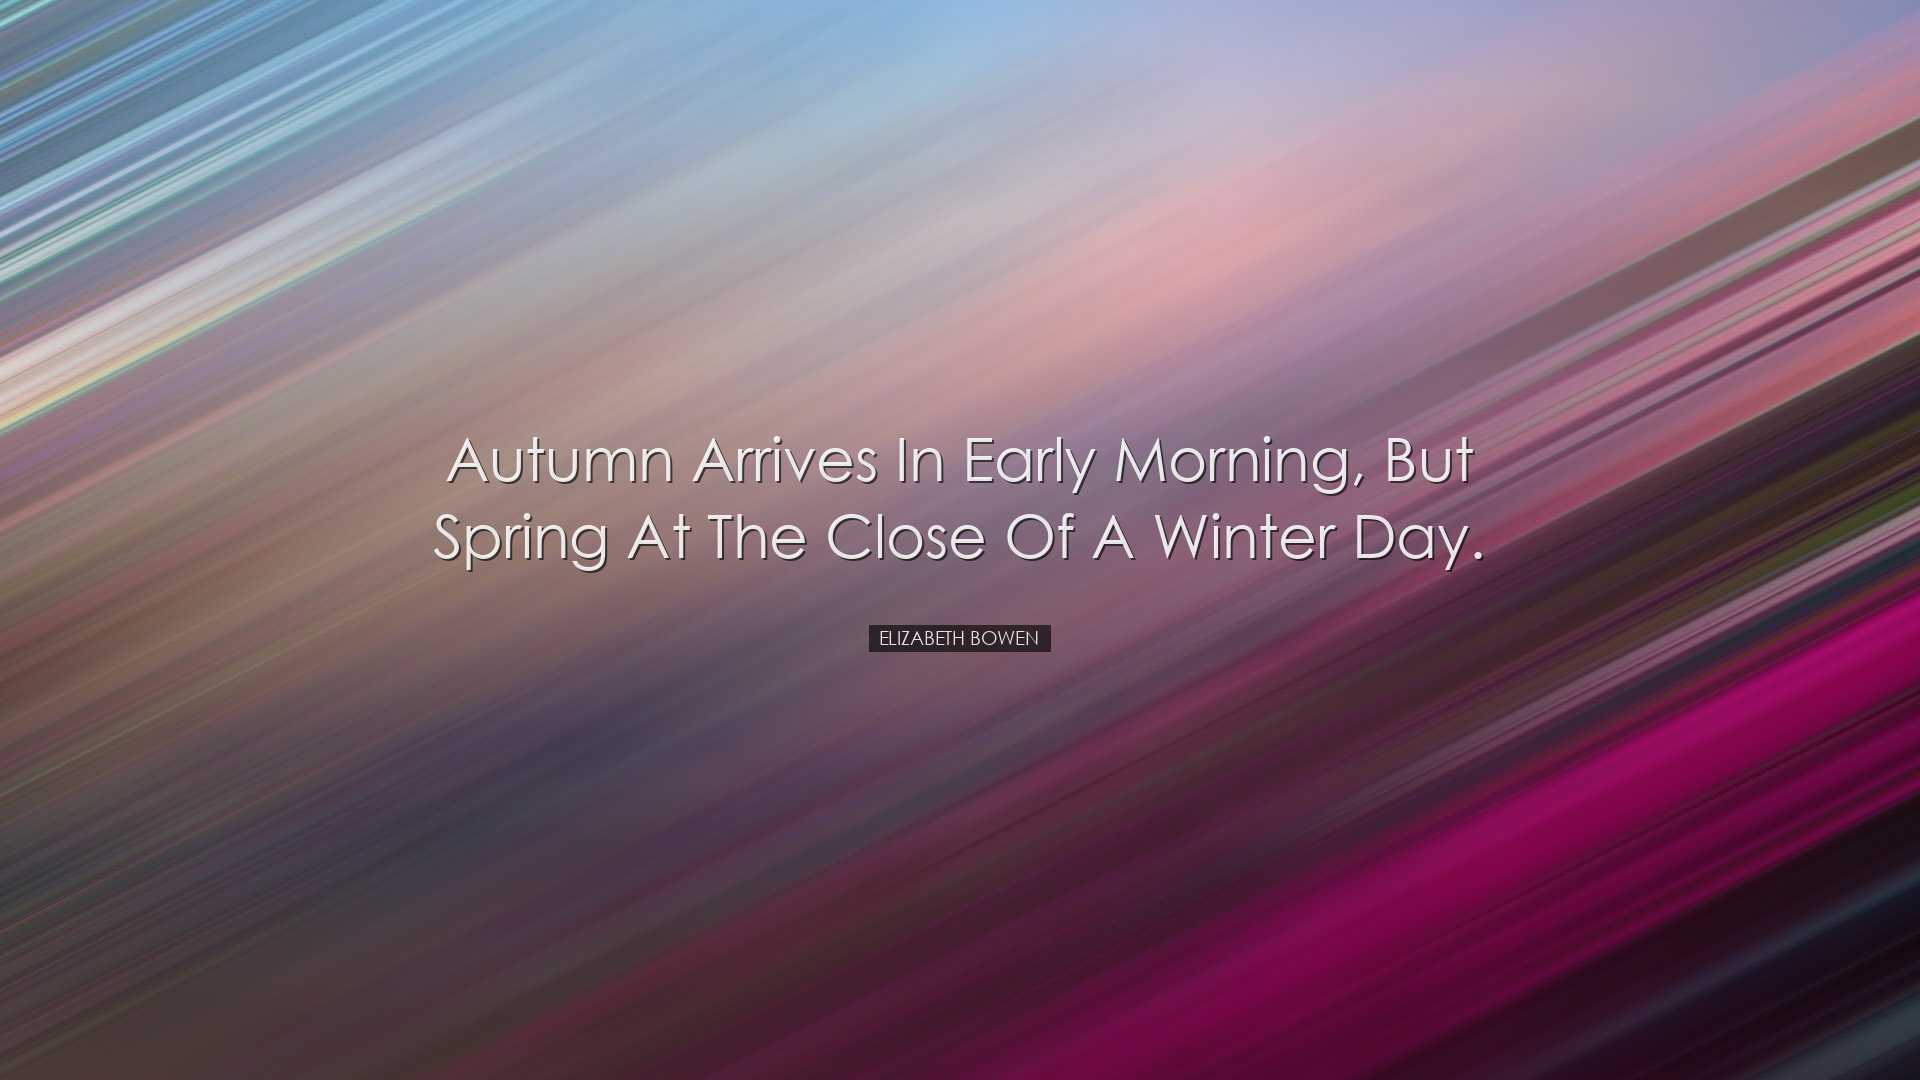 Autumn arrives in early morning, but spring at the close of a wint